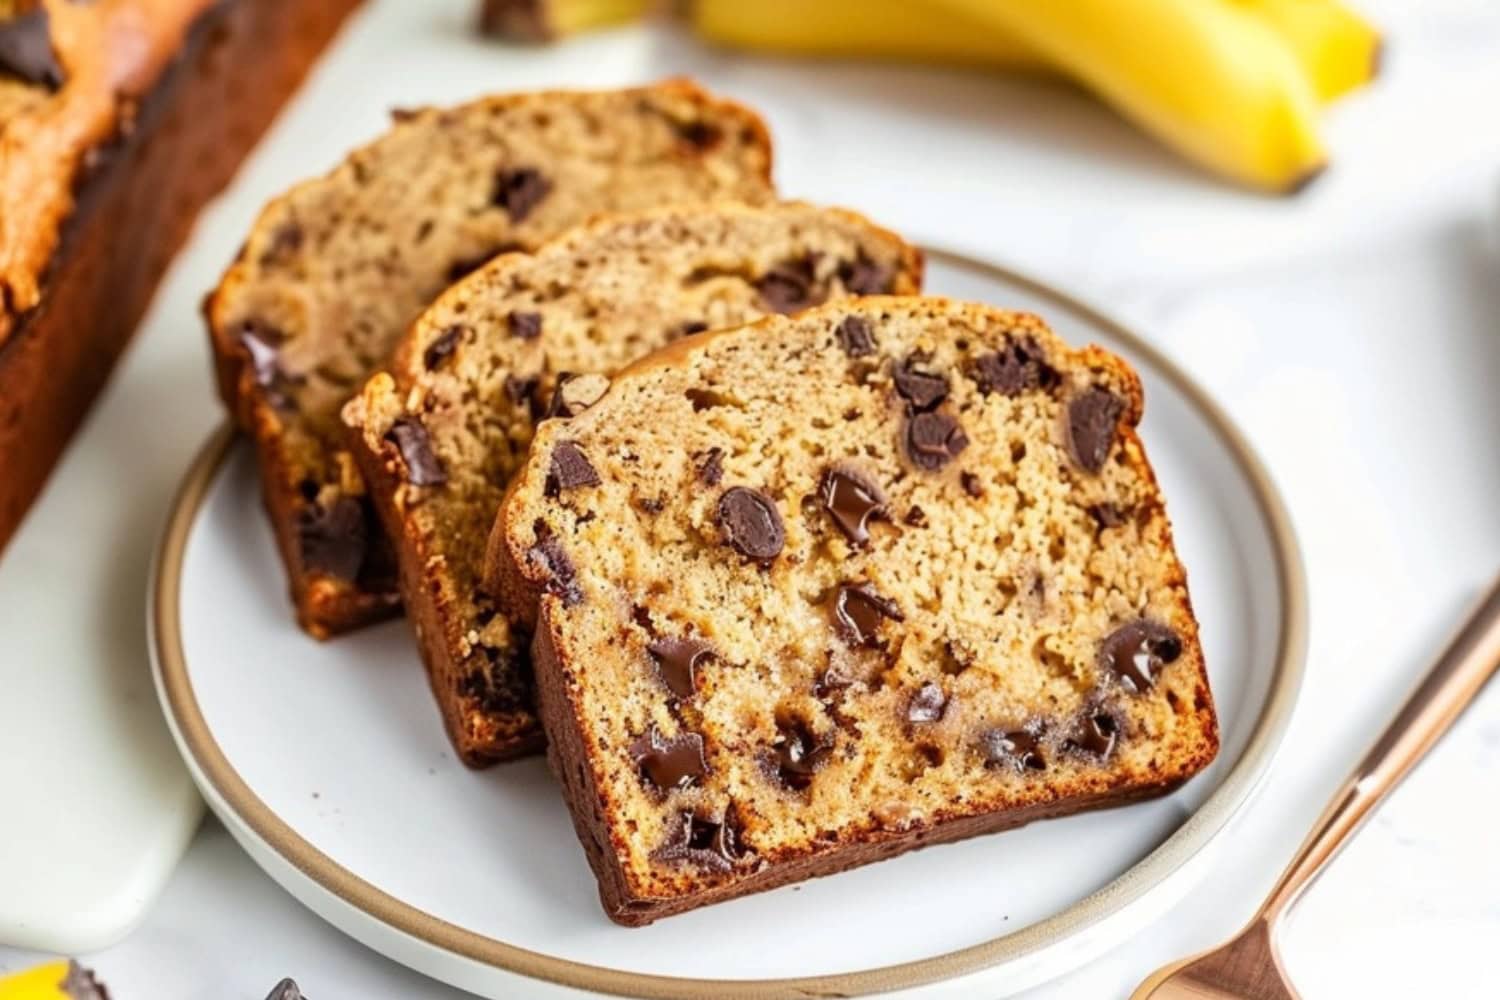 Slices of peanut butter banana bread with semi-sweet chocolate chips in a plate.